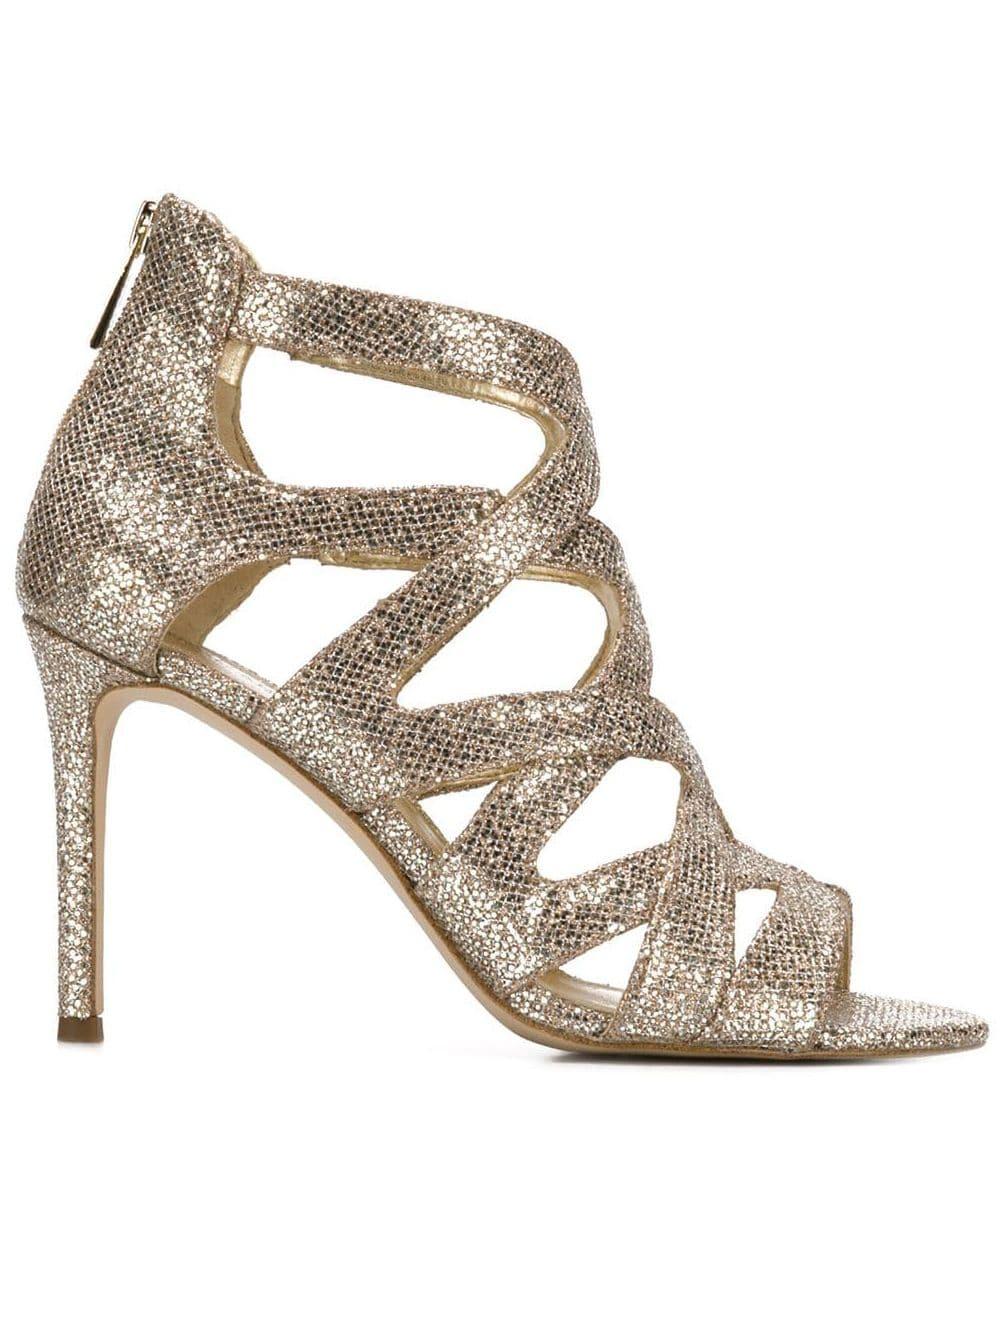 MICHAEL Michael Kors Synthetic Annalee Sandals in Gold (Metallic) - Lyst